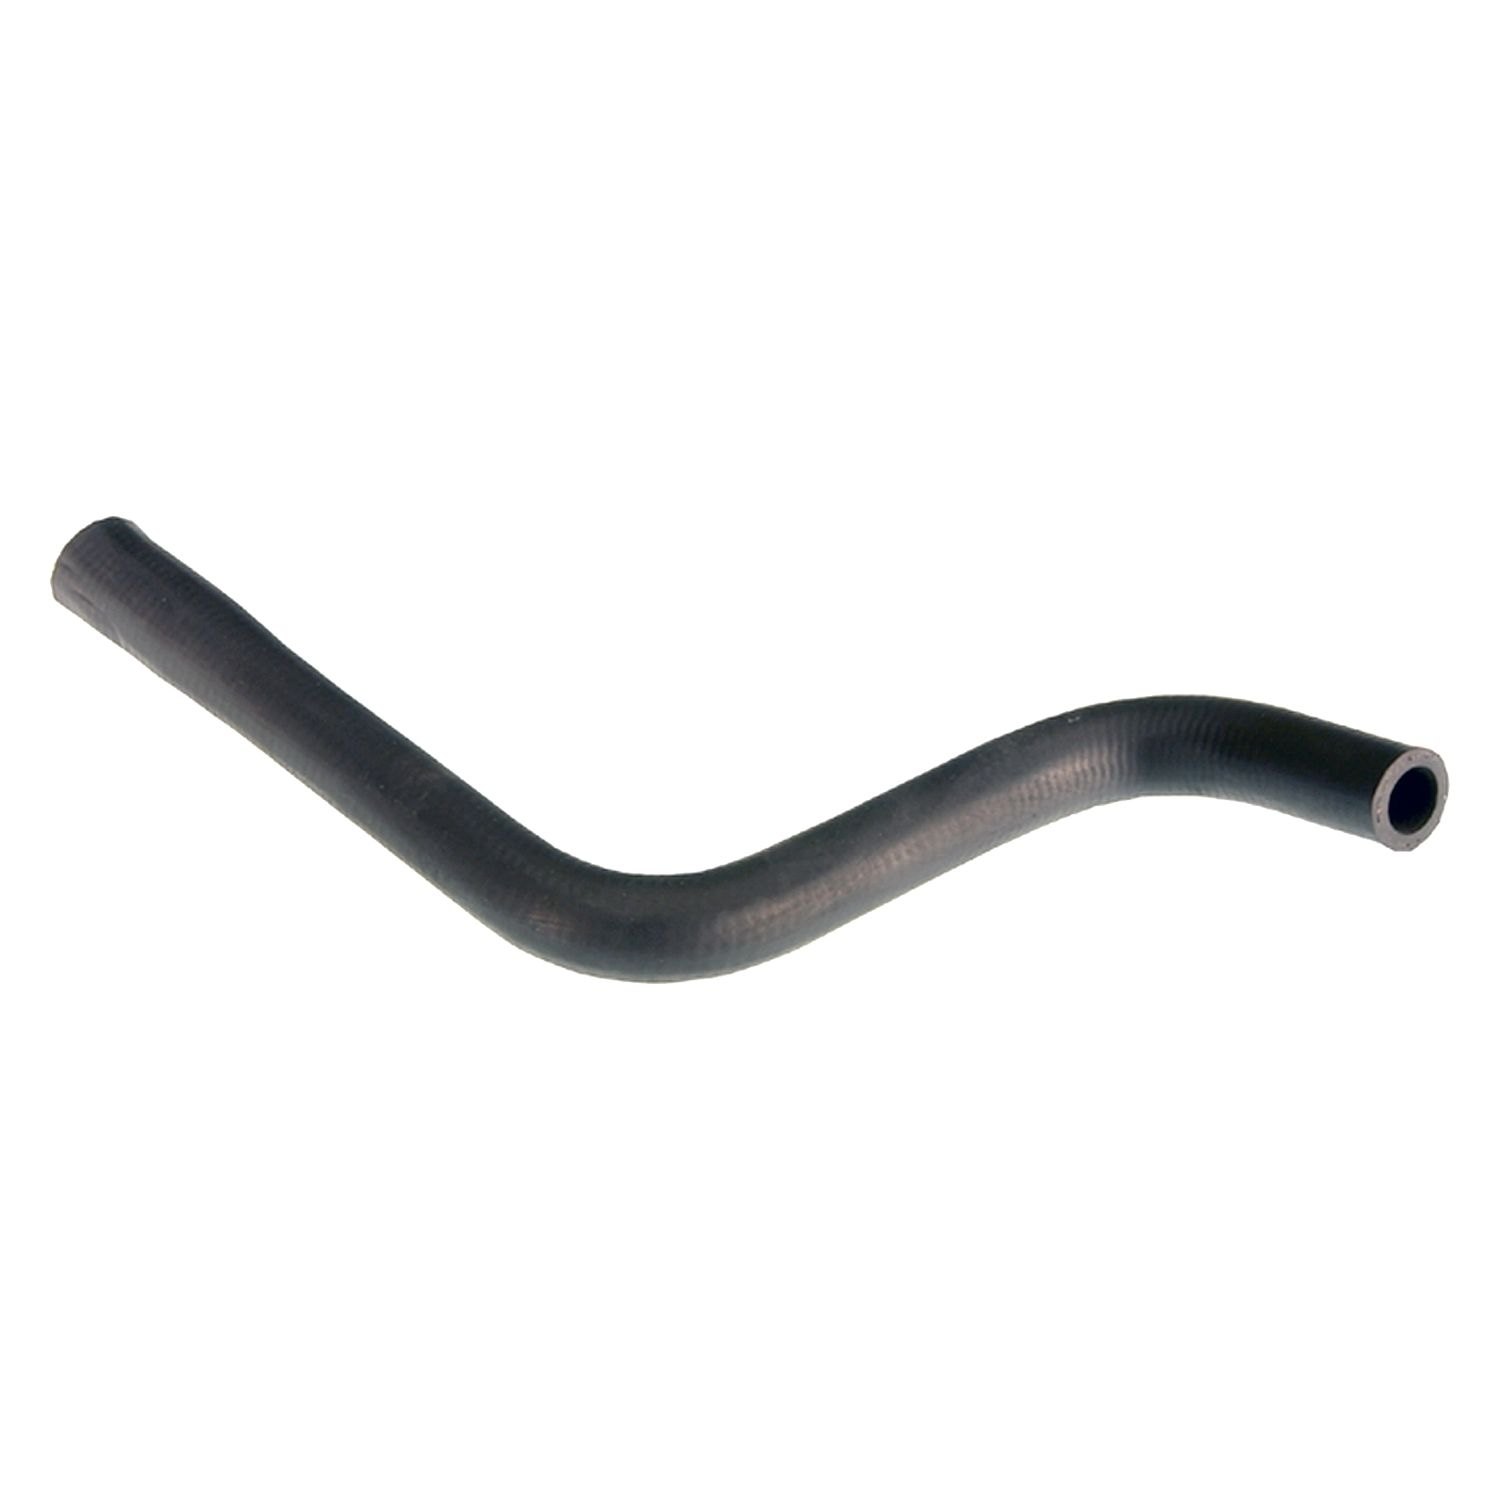 ACDelco 16004M Professional Molded Heater Hose 